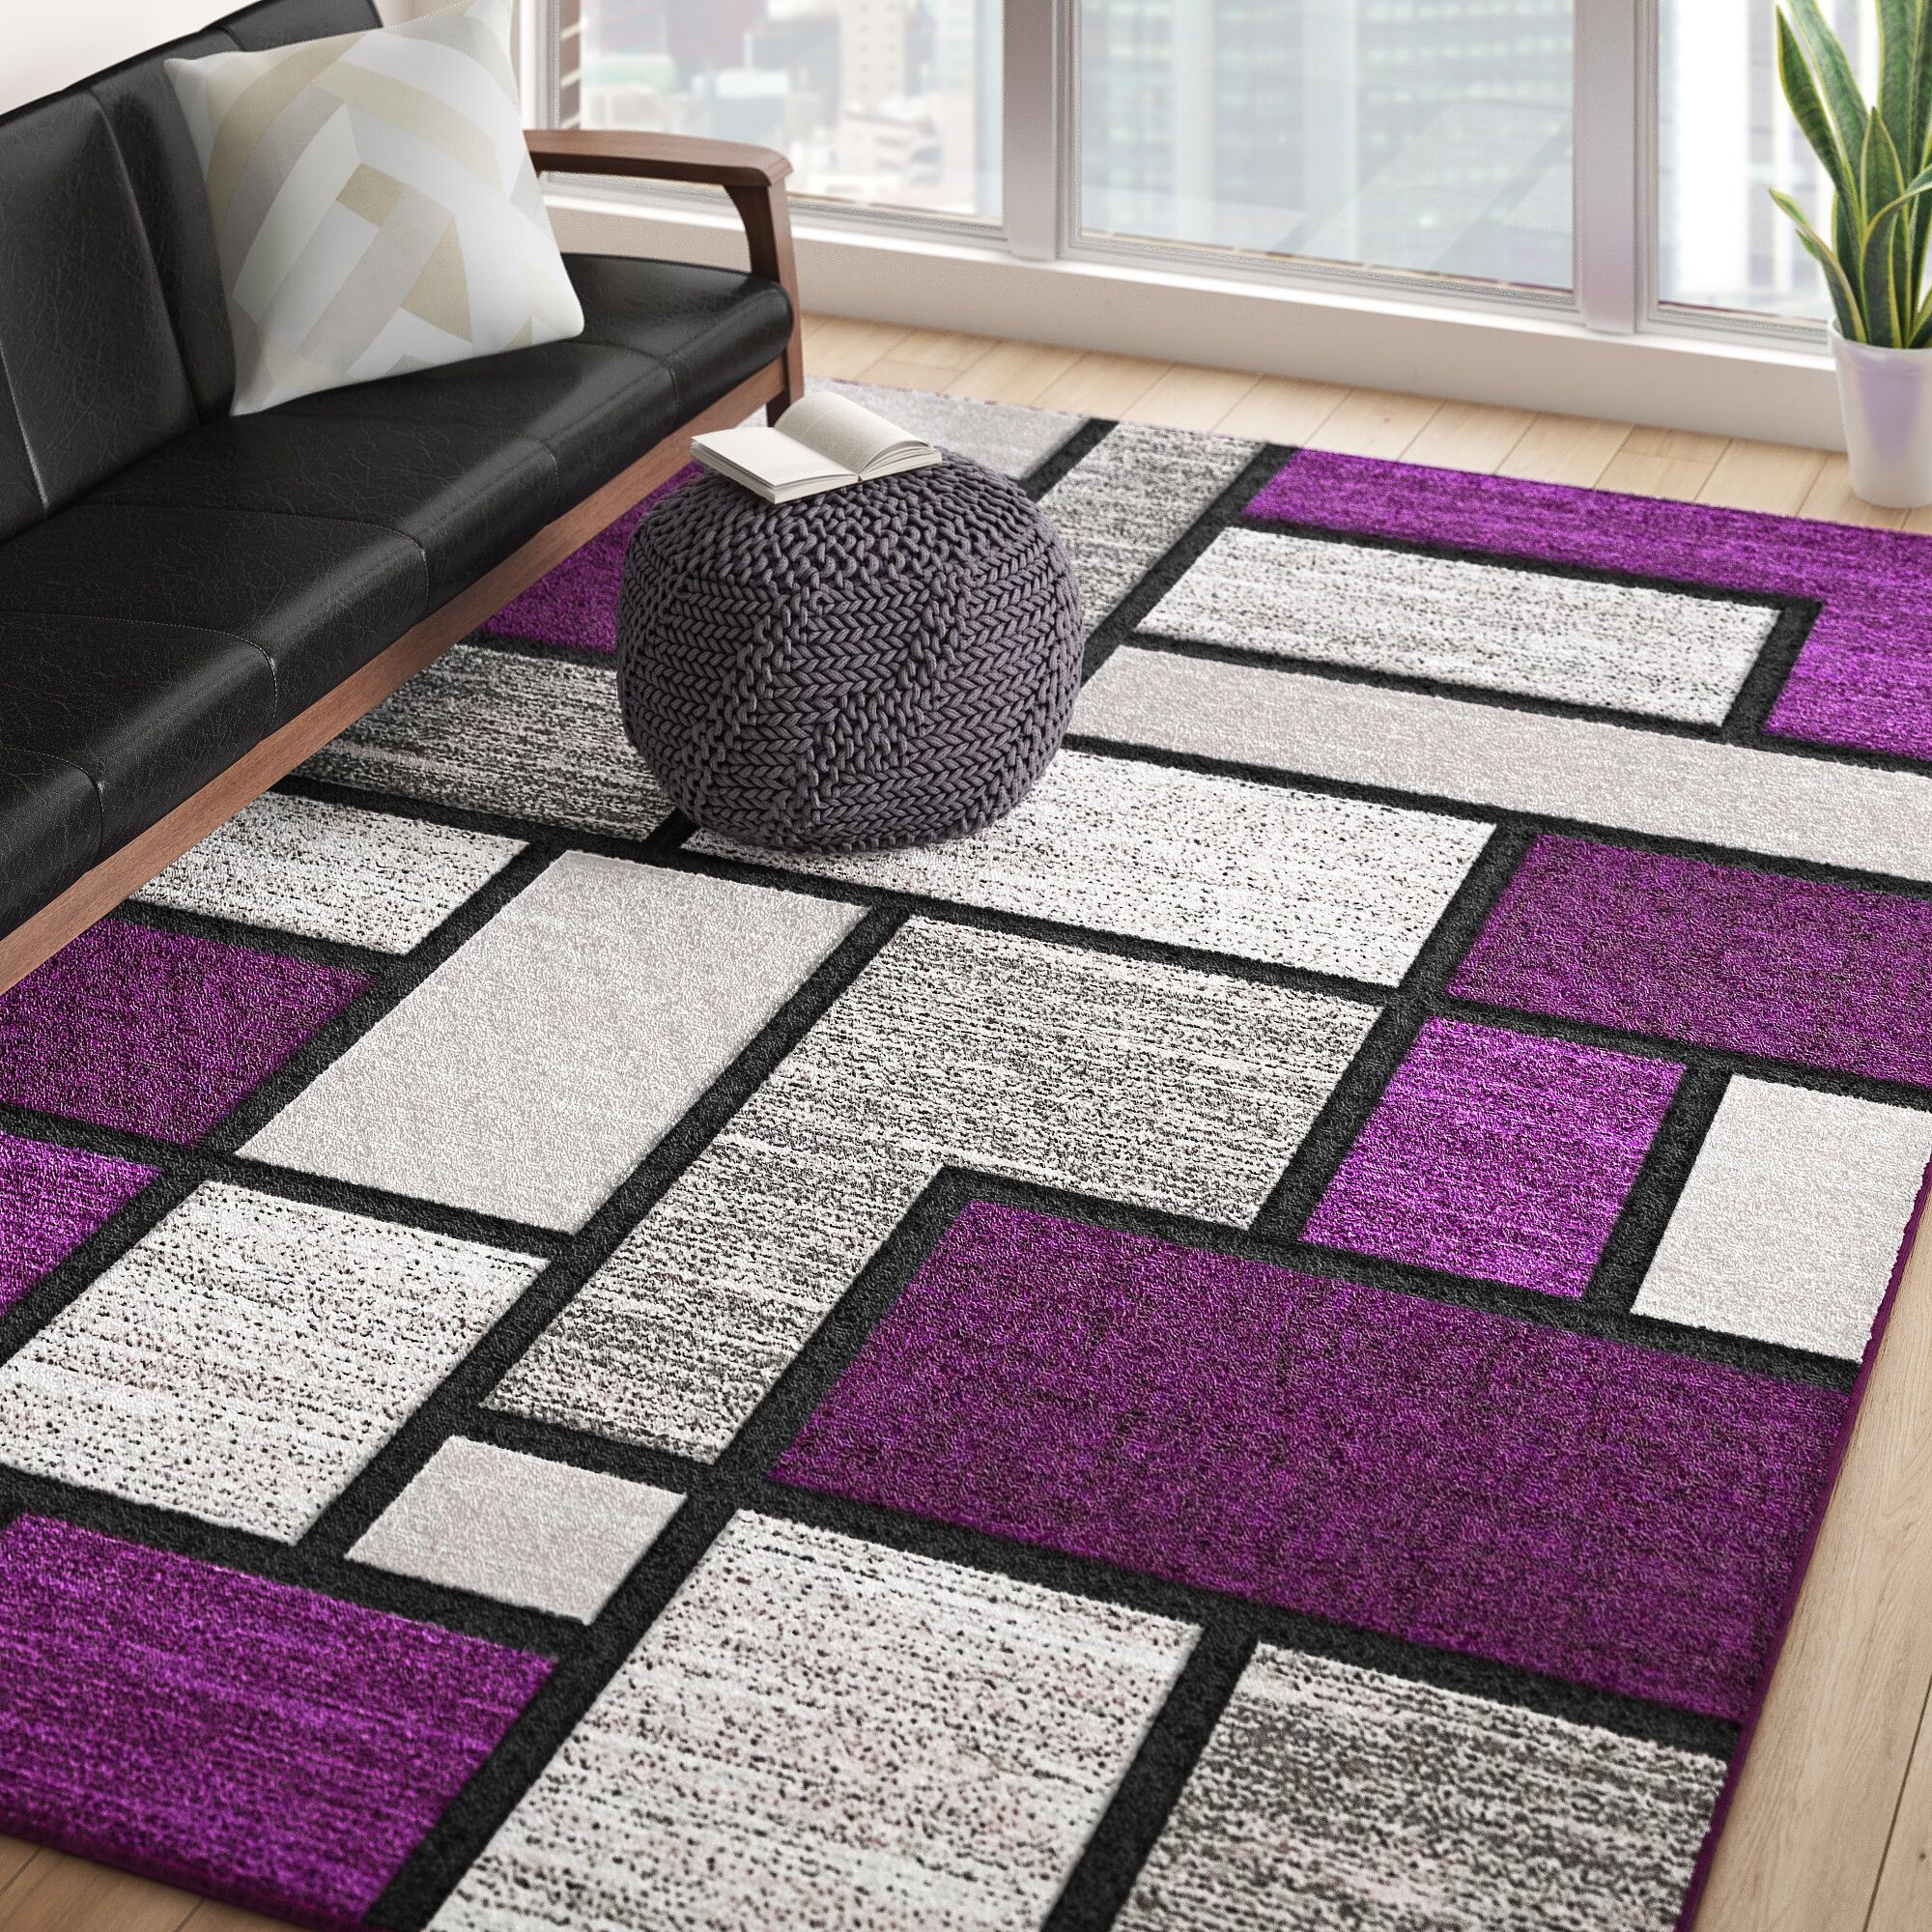 Ivy Bronx Mccampbell Performance Bland Purple Rug & Reviews | Wayfair With Purple Rugs (View 3 of 15)